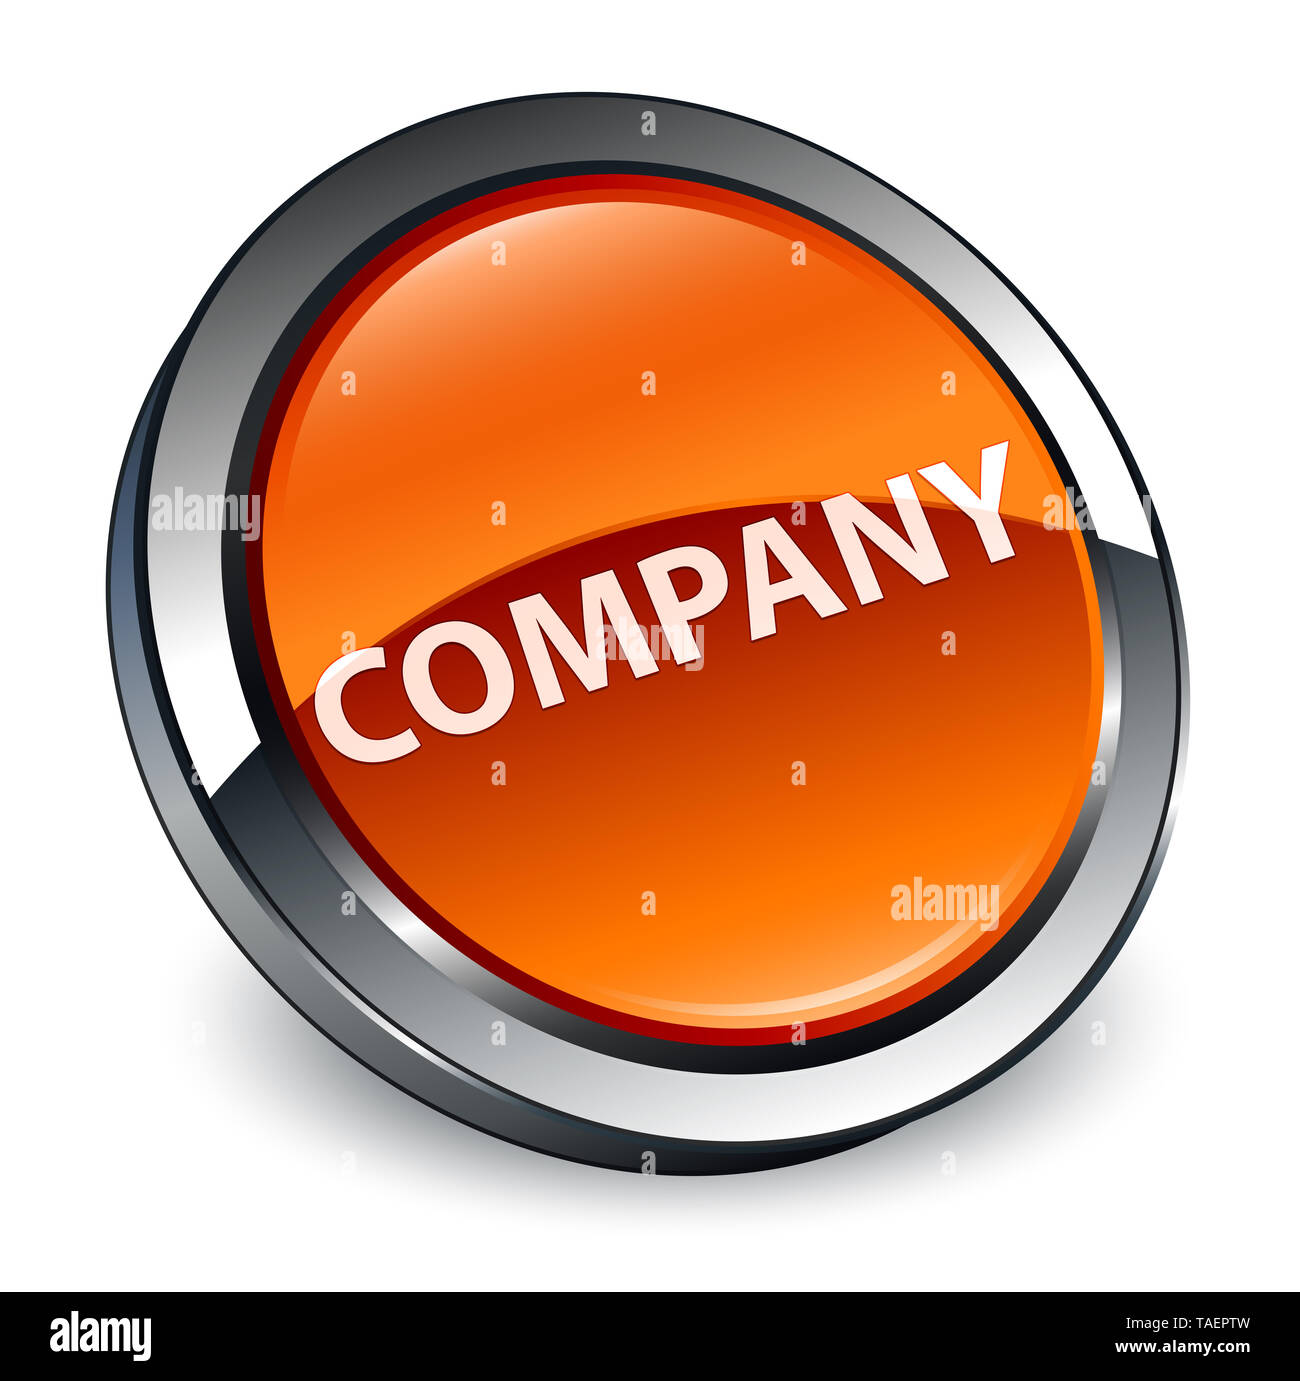 Company isolated on 3d brown round button abstract illustration Stock Photo